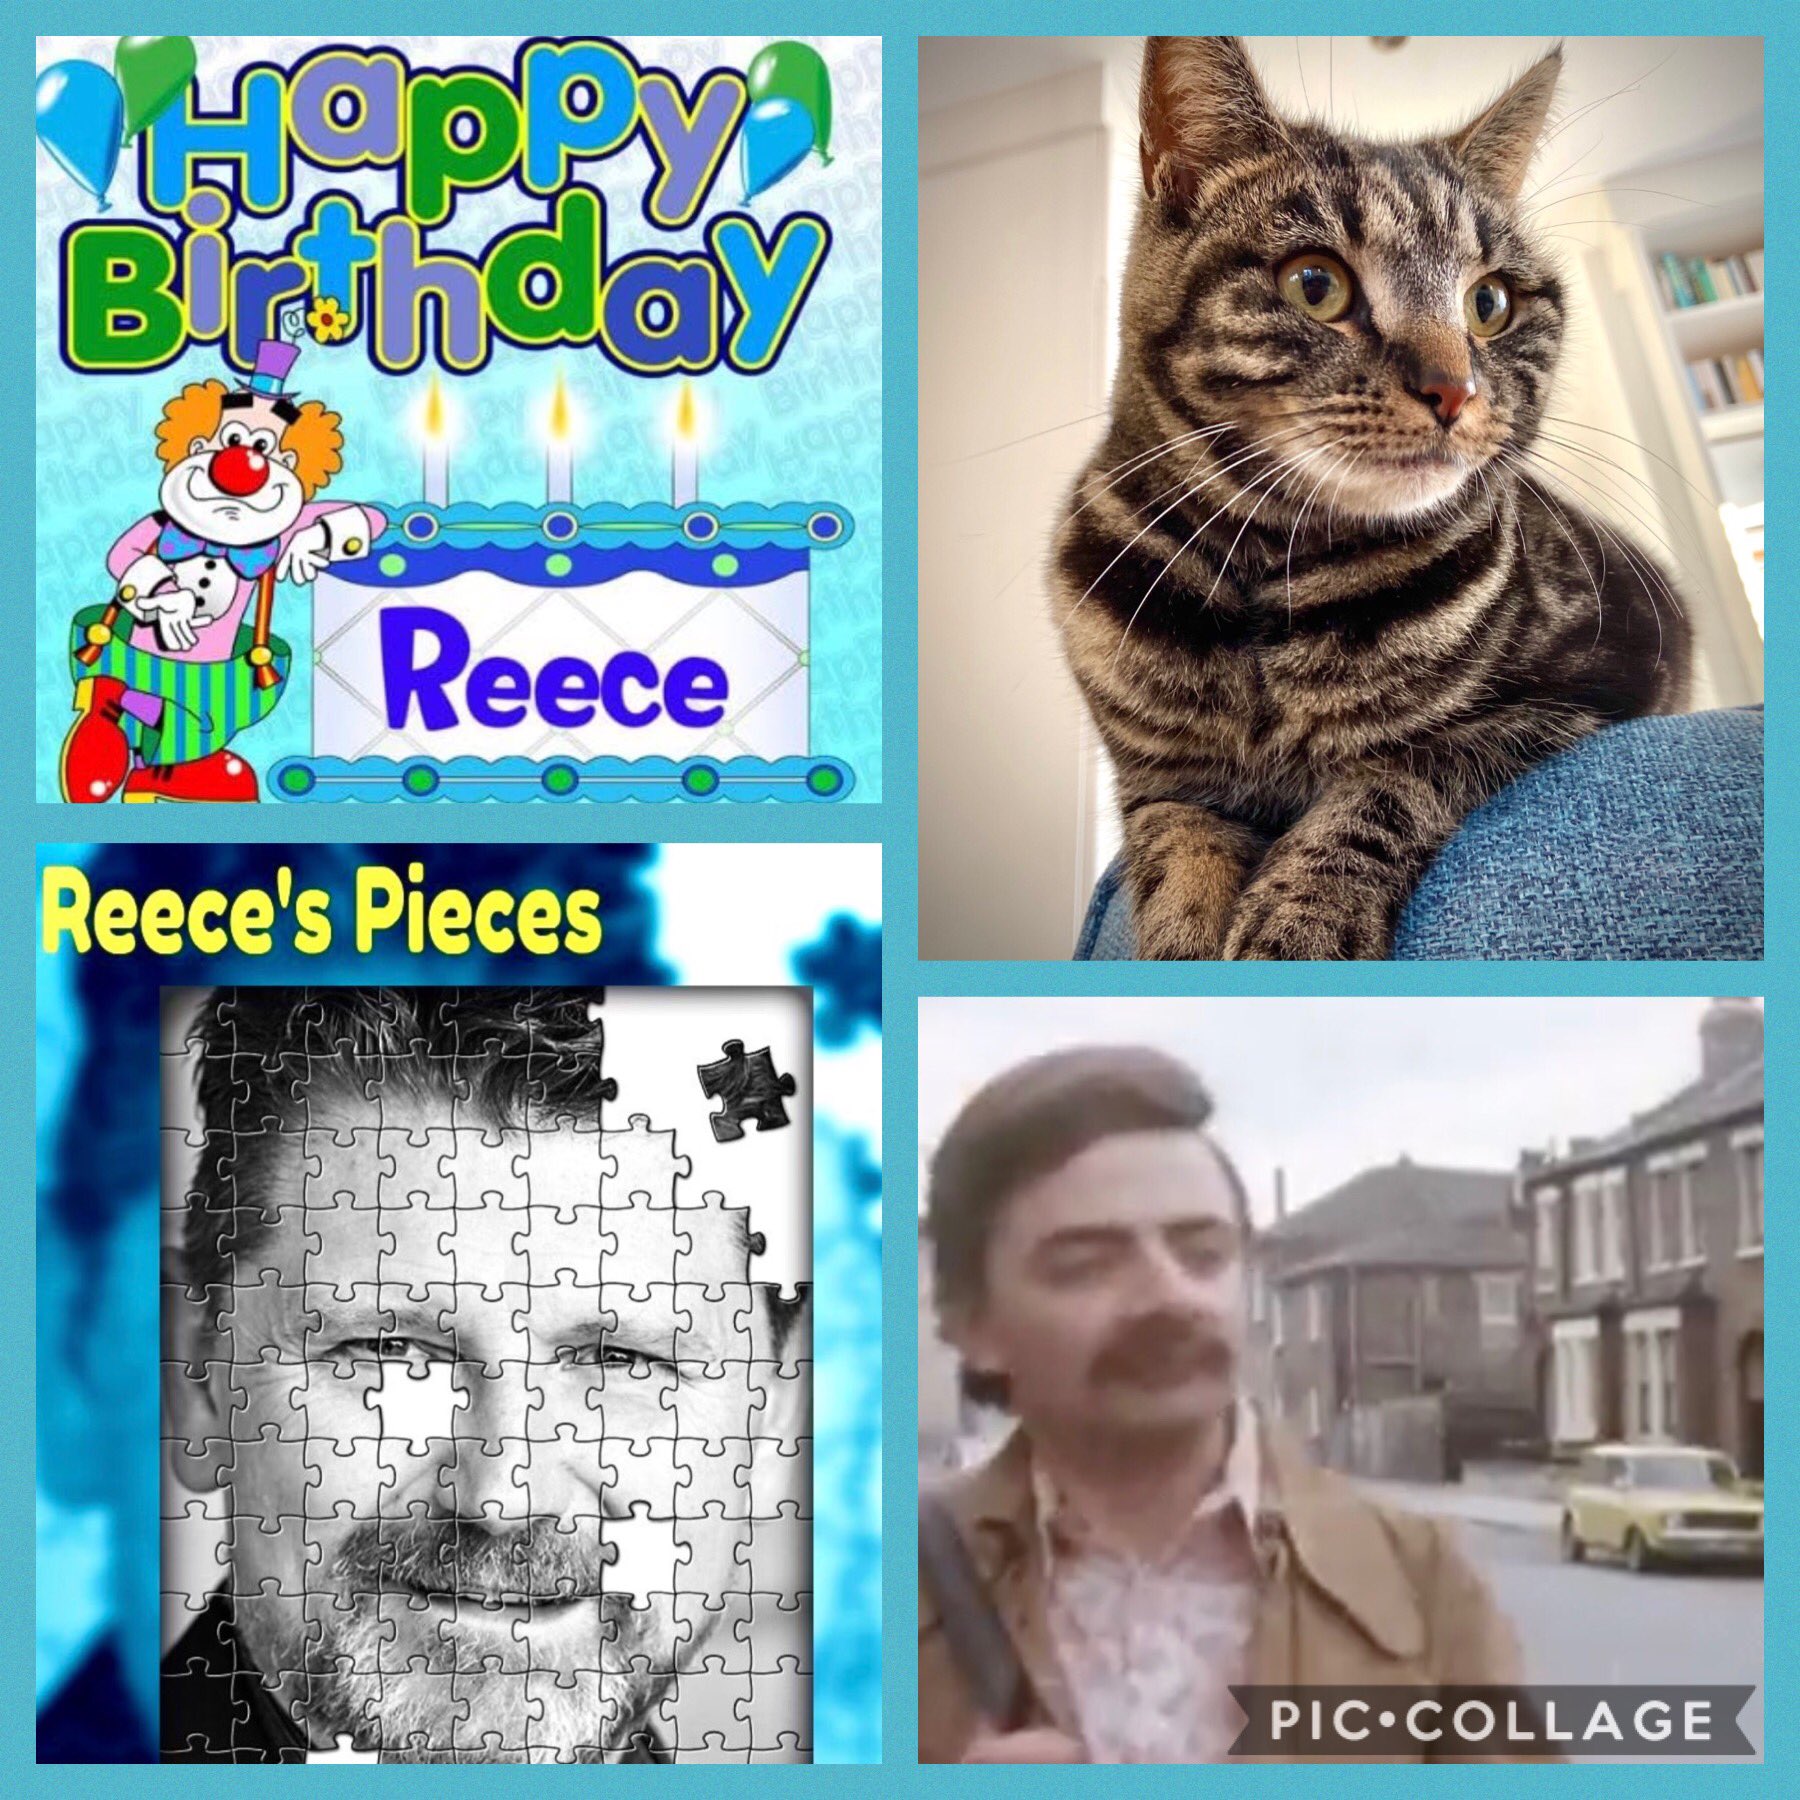  Happy Birthday Reece , mixed emotions today for you       